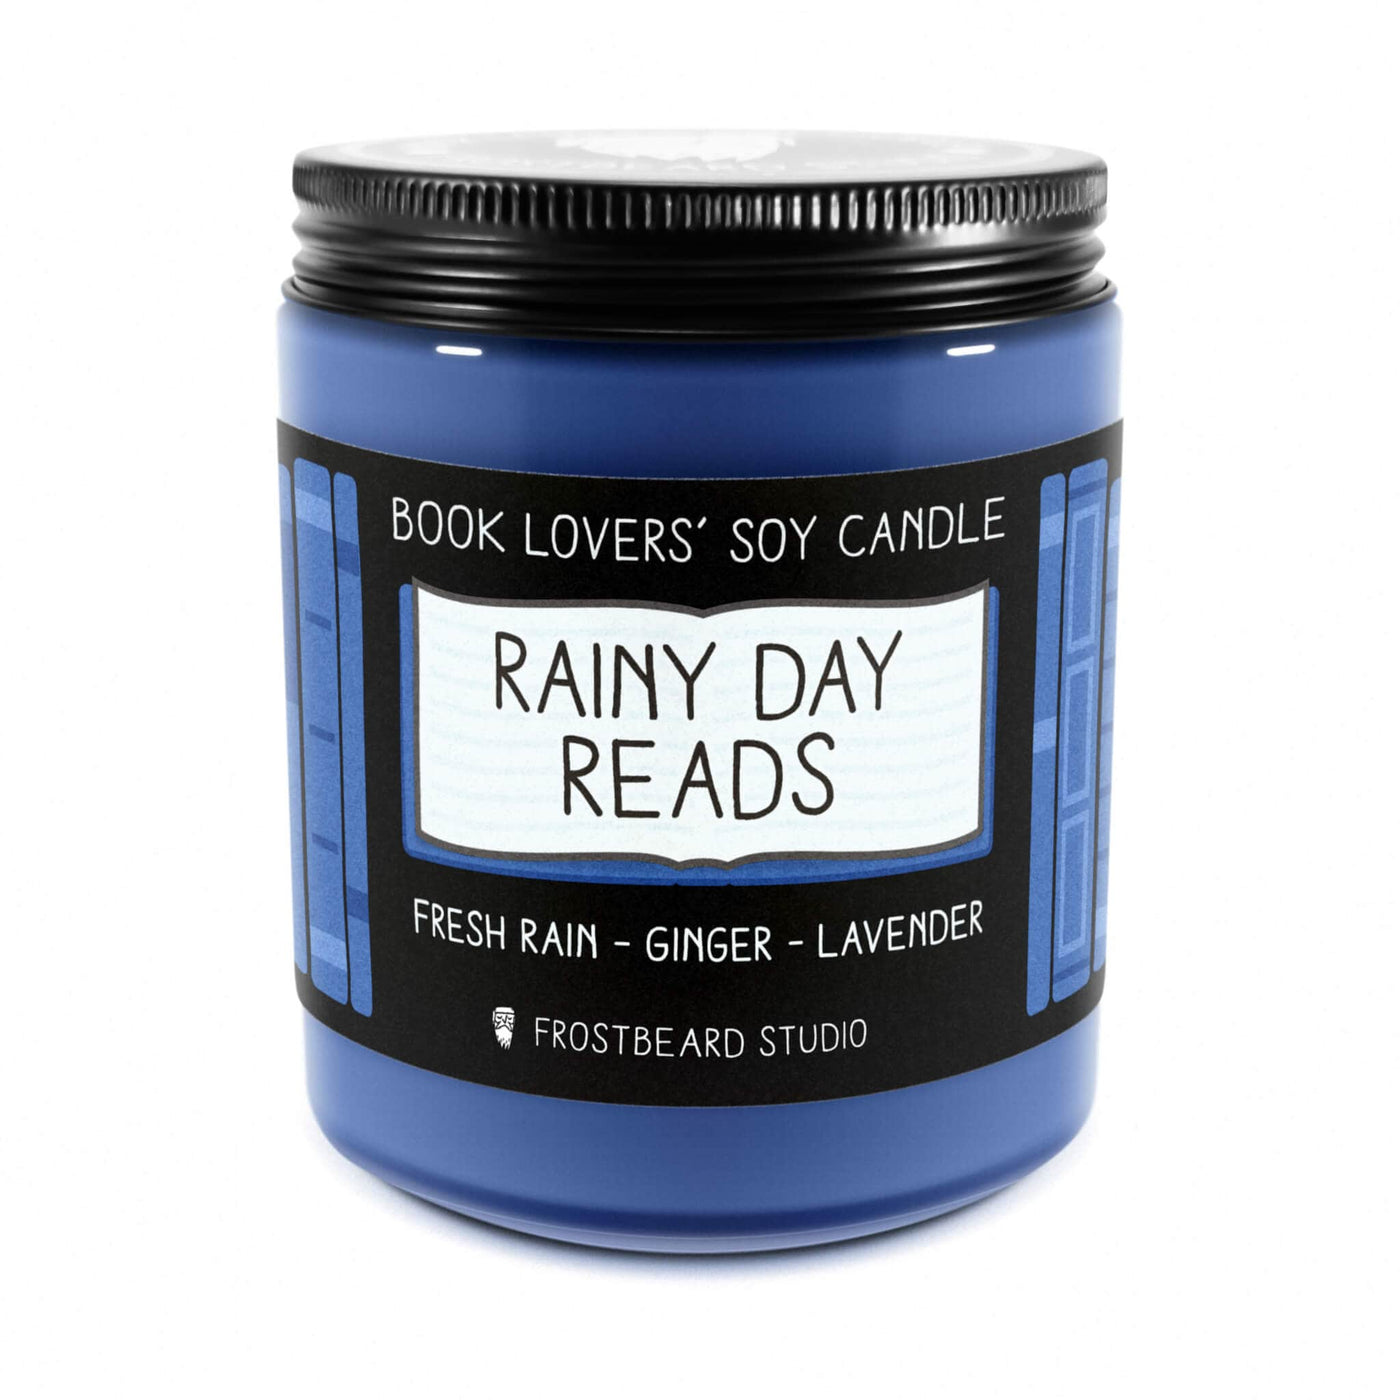 Rainy Day Reads - 8 oz Jar - Book Lovers' Soy Candle - Frostbeard Studio